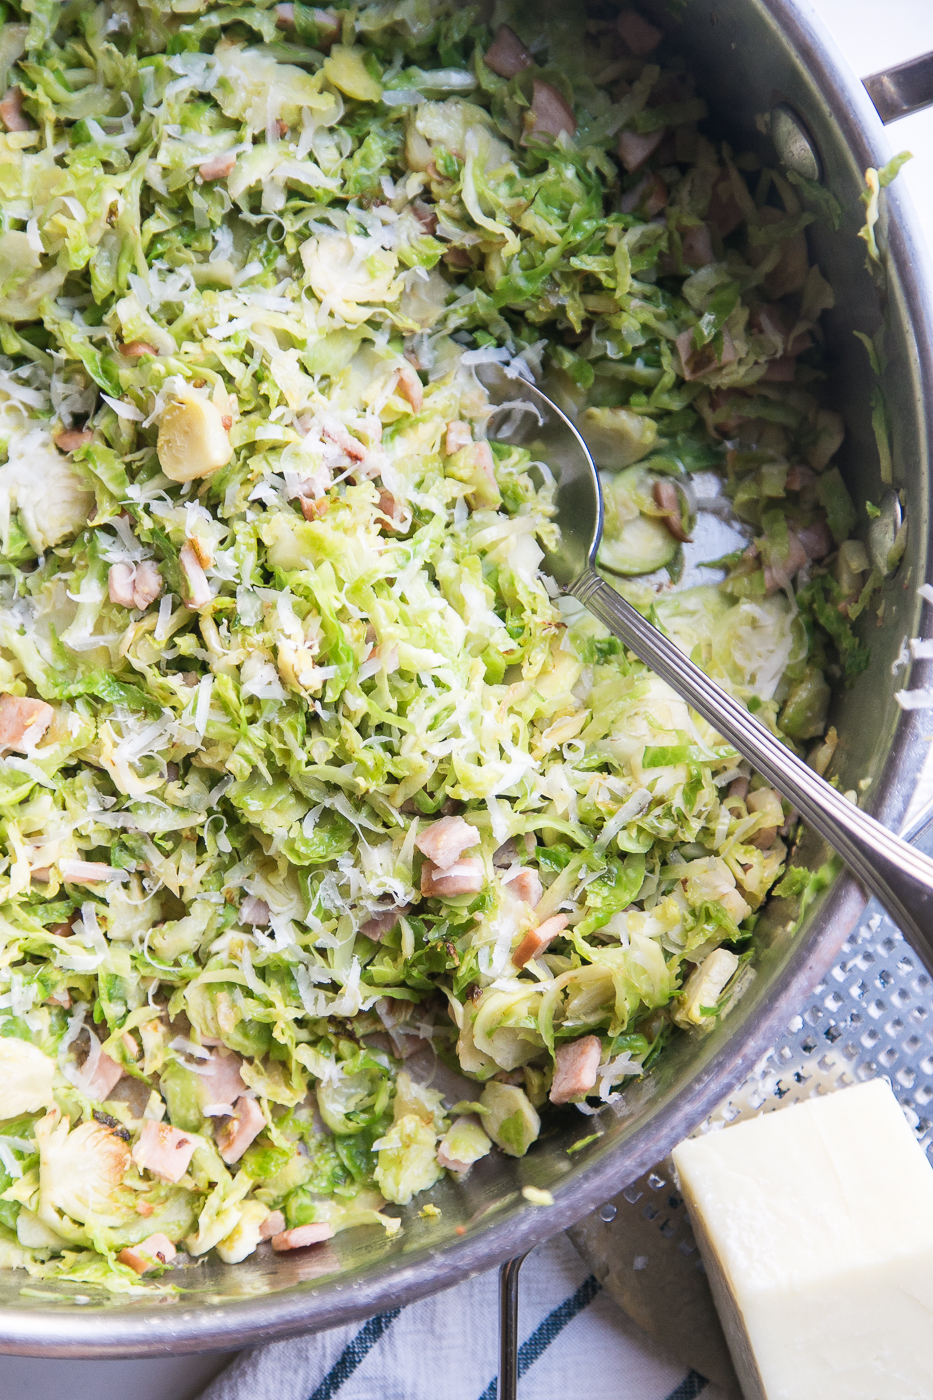 https://www.perrysplate.com/wp-content/uploads/2021/11/Shredded-Brussels-Sprout-and-Ham-Hash-3.jpg